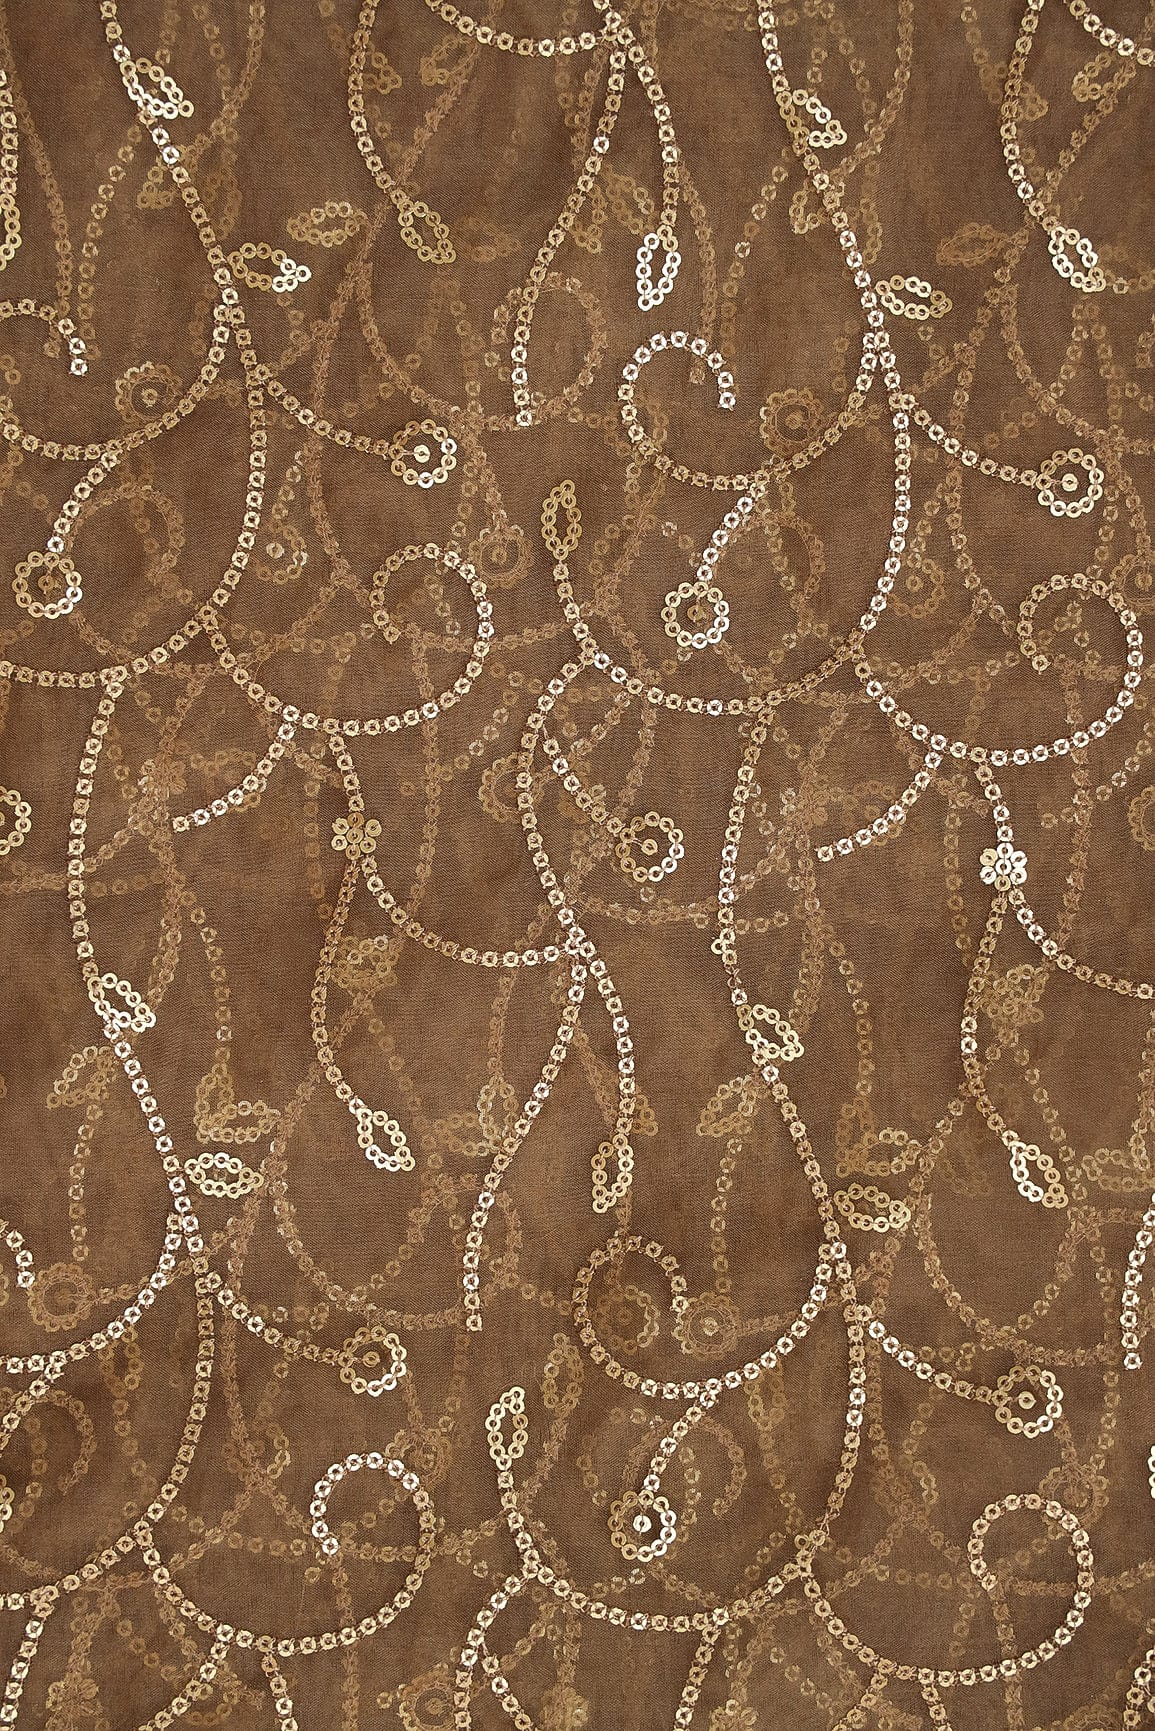 doeraa Embroidery Fabrics Cultural Gold Sequins Embroidery on Brown Organza Fabric